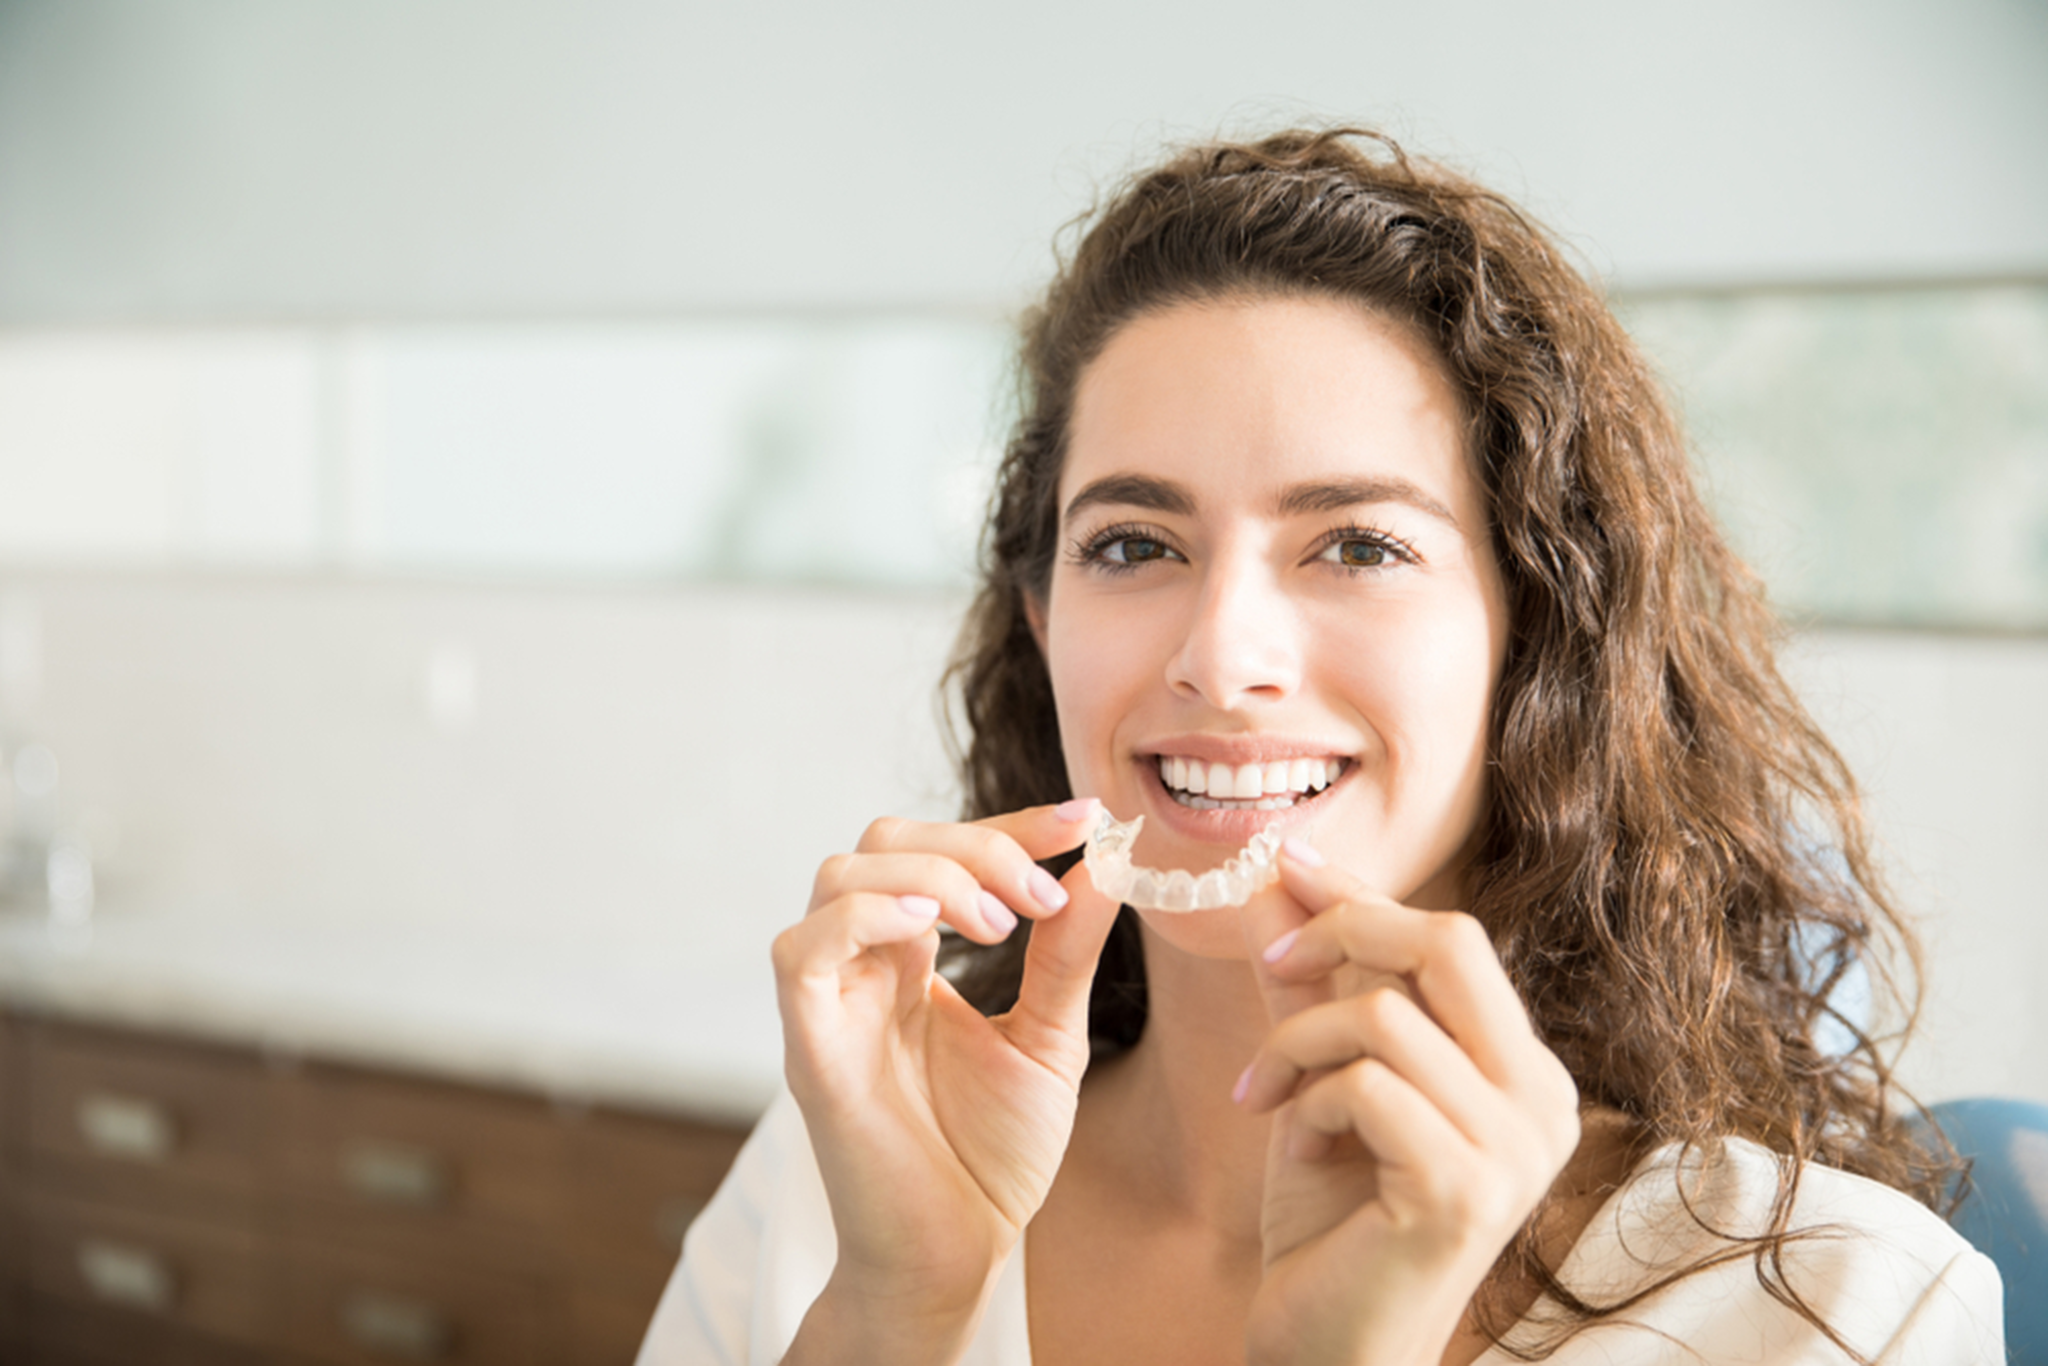 amazing facts about invisalign